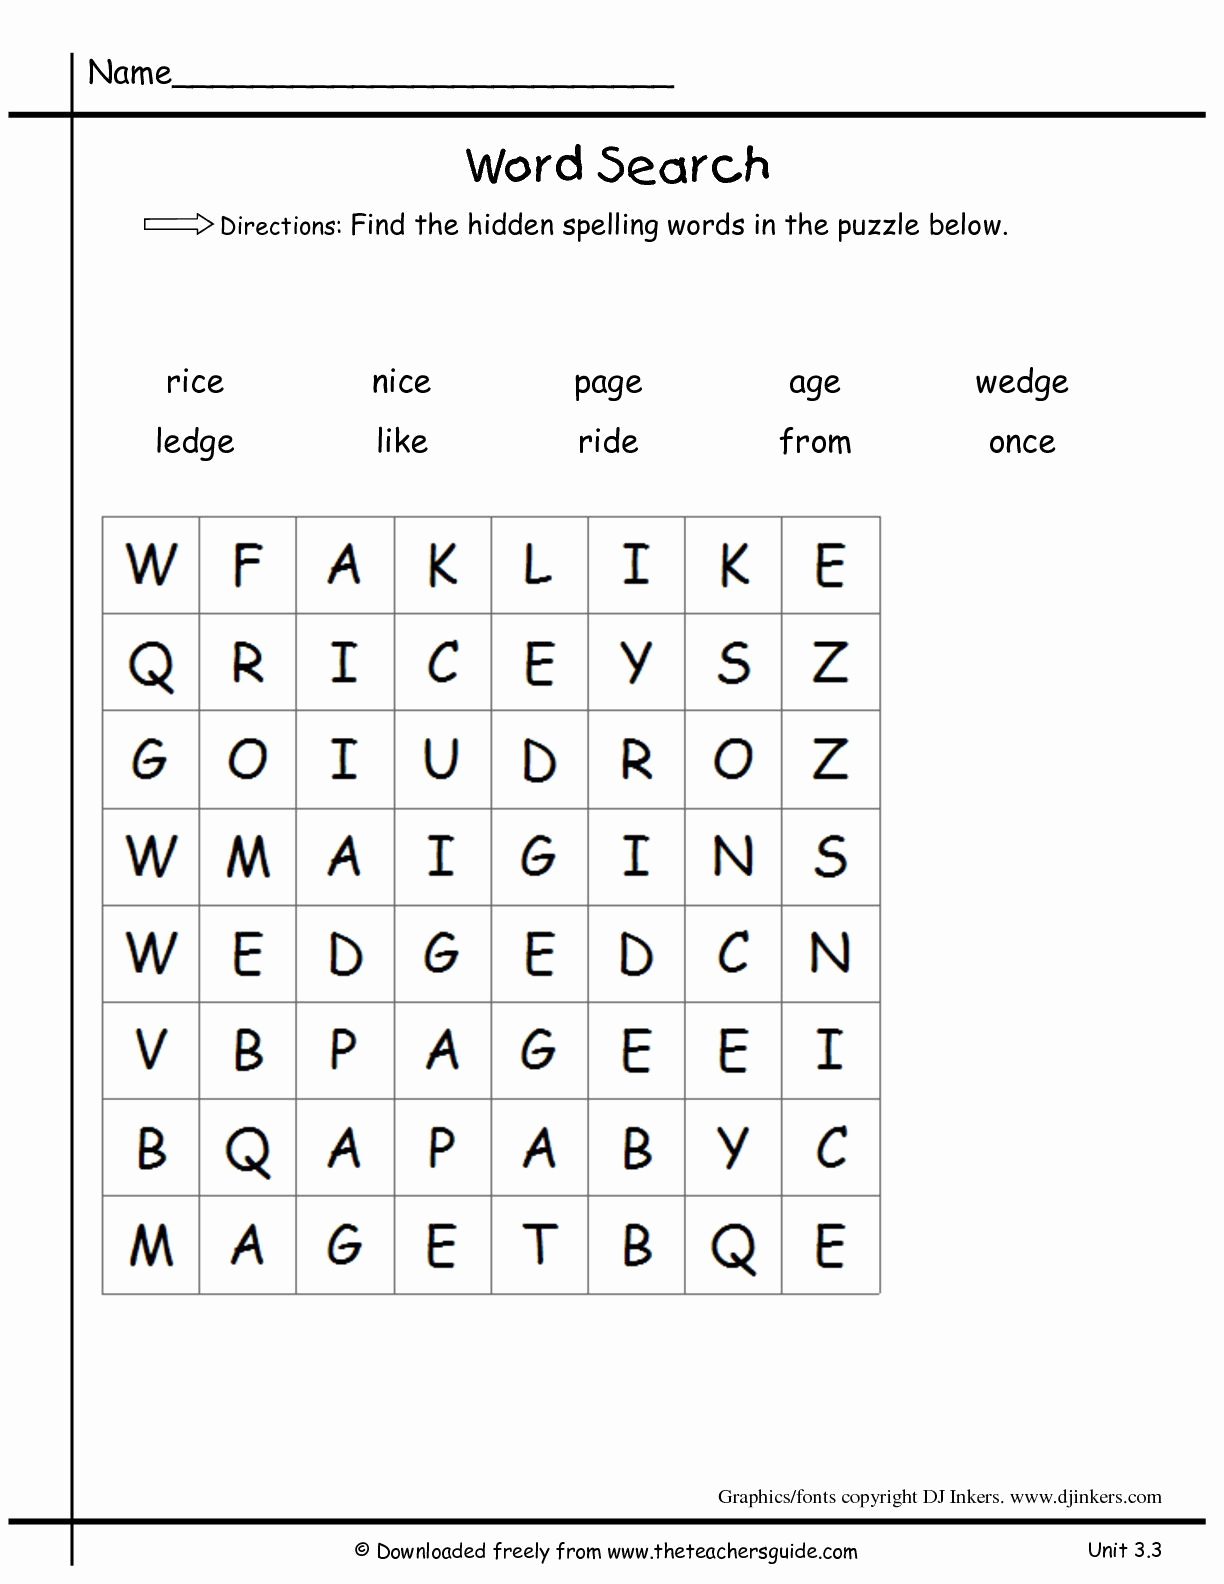 Vocabulary Worksheets for 1st Graders Beautiful Teach Child How to Read 1st Grade Free Vocabulary